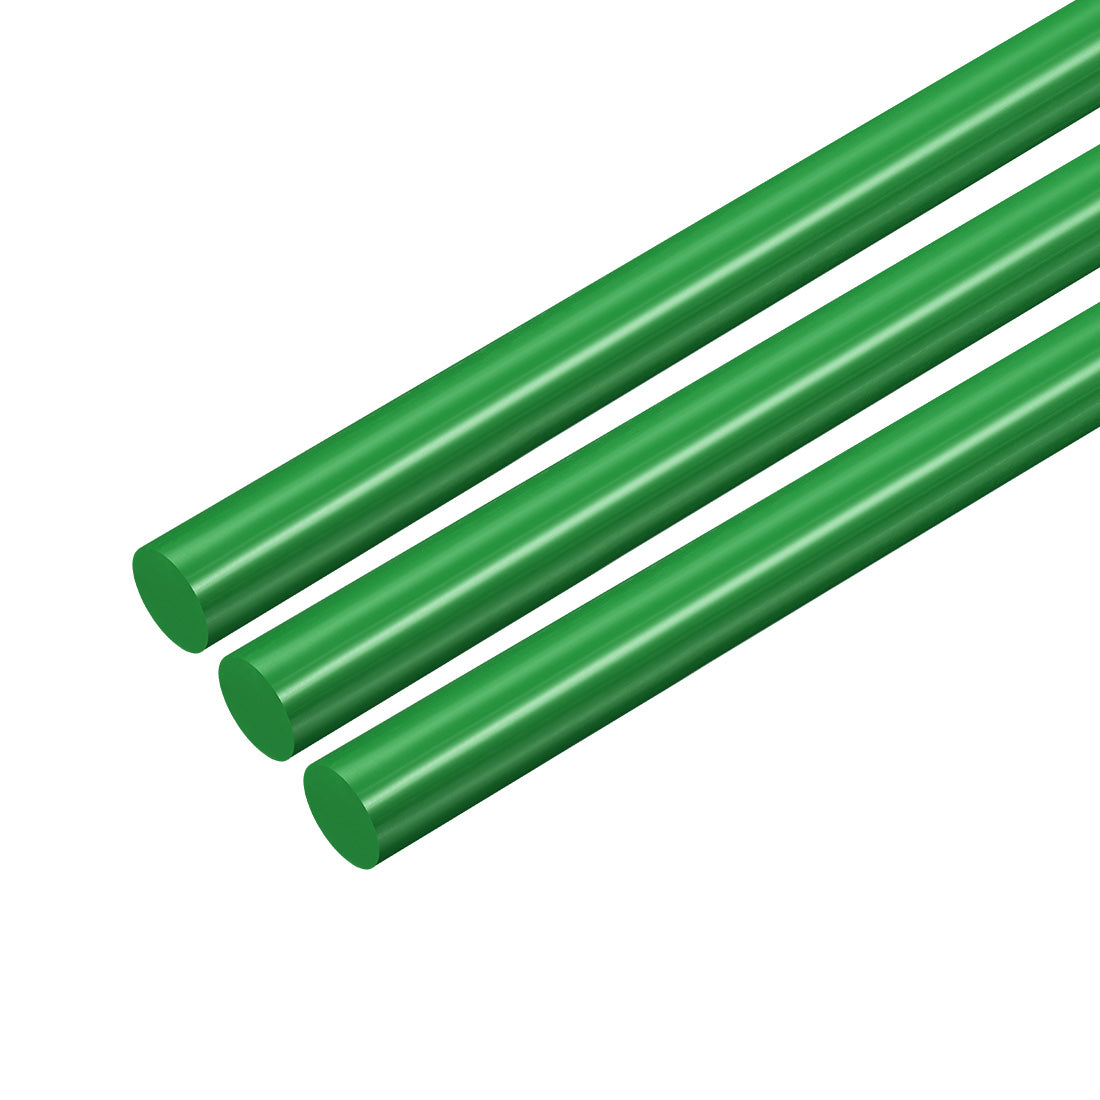 uxcell Uxcell Plastic Round Rod,6mm Dia 50cm Green Engineering Plastic Round Bar 3pcs